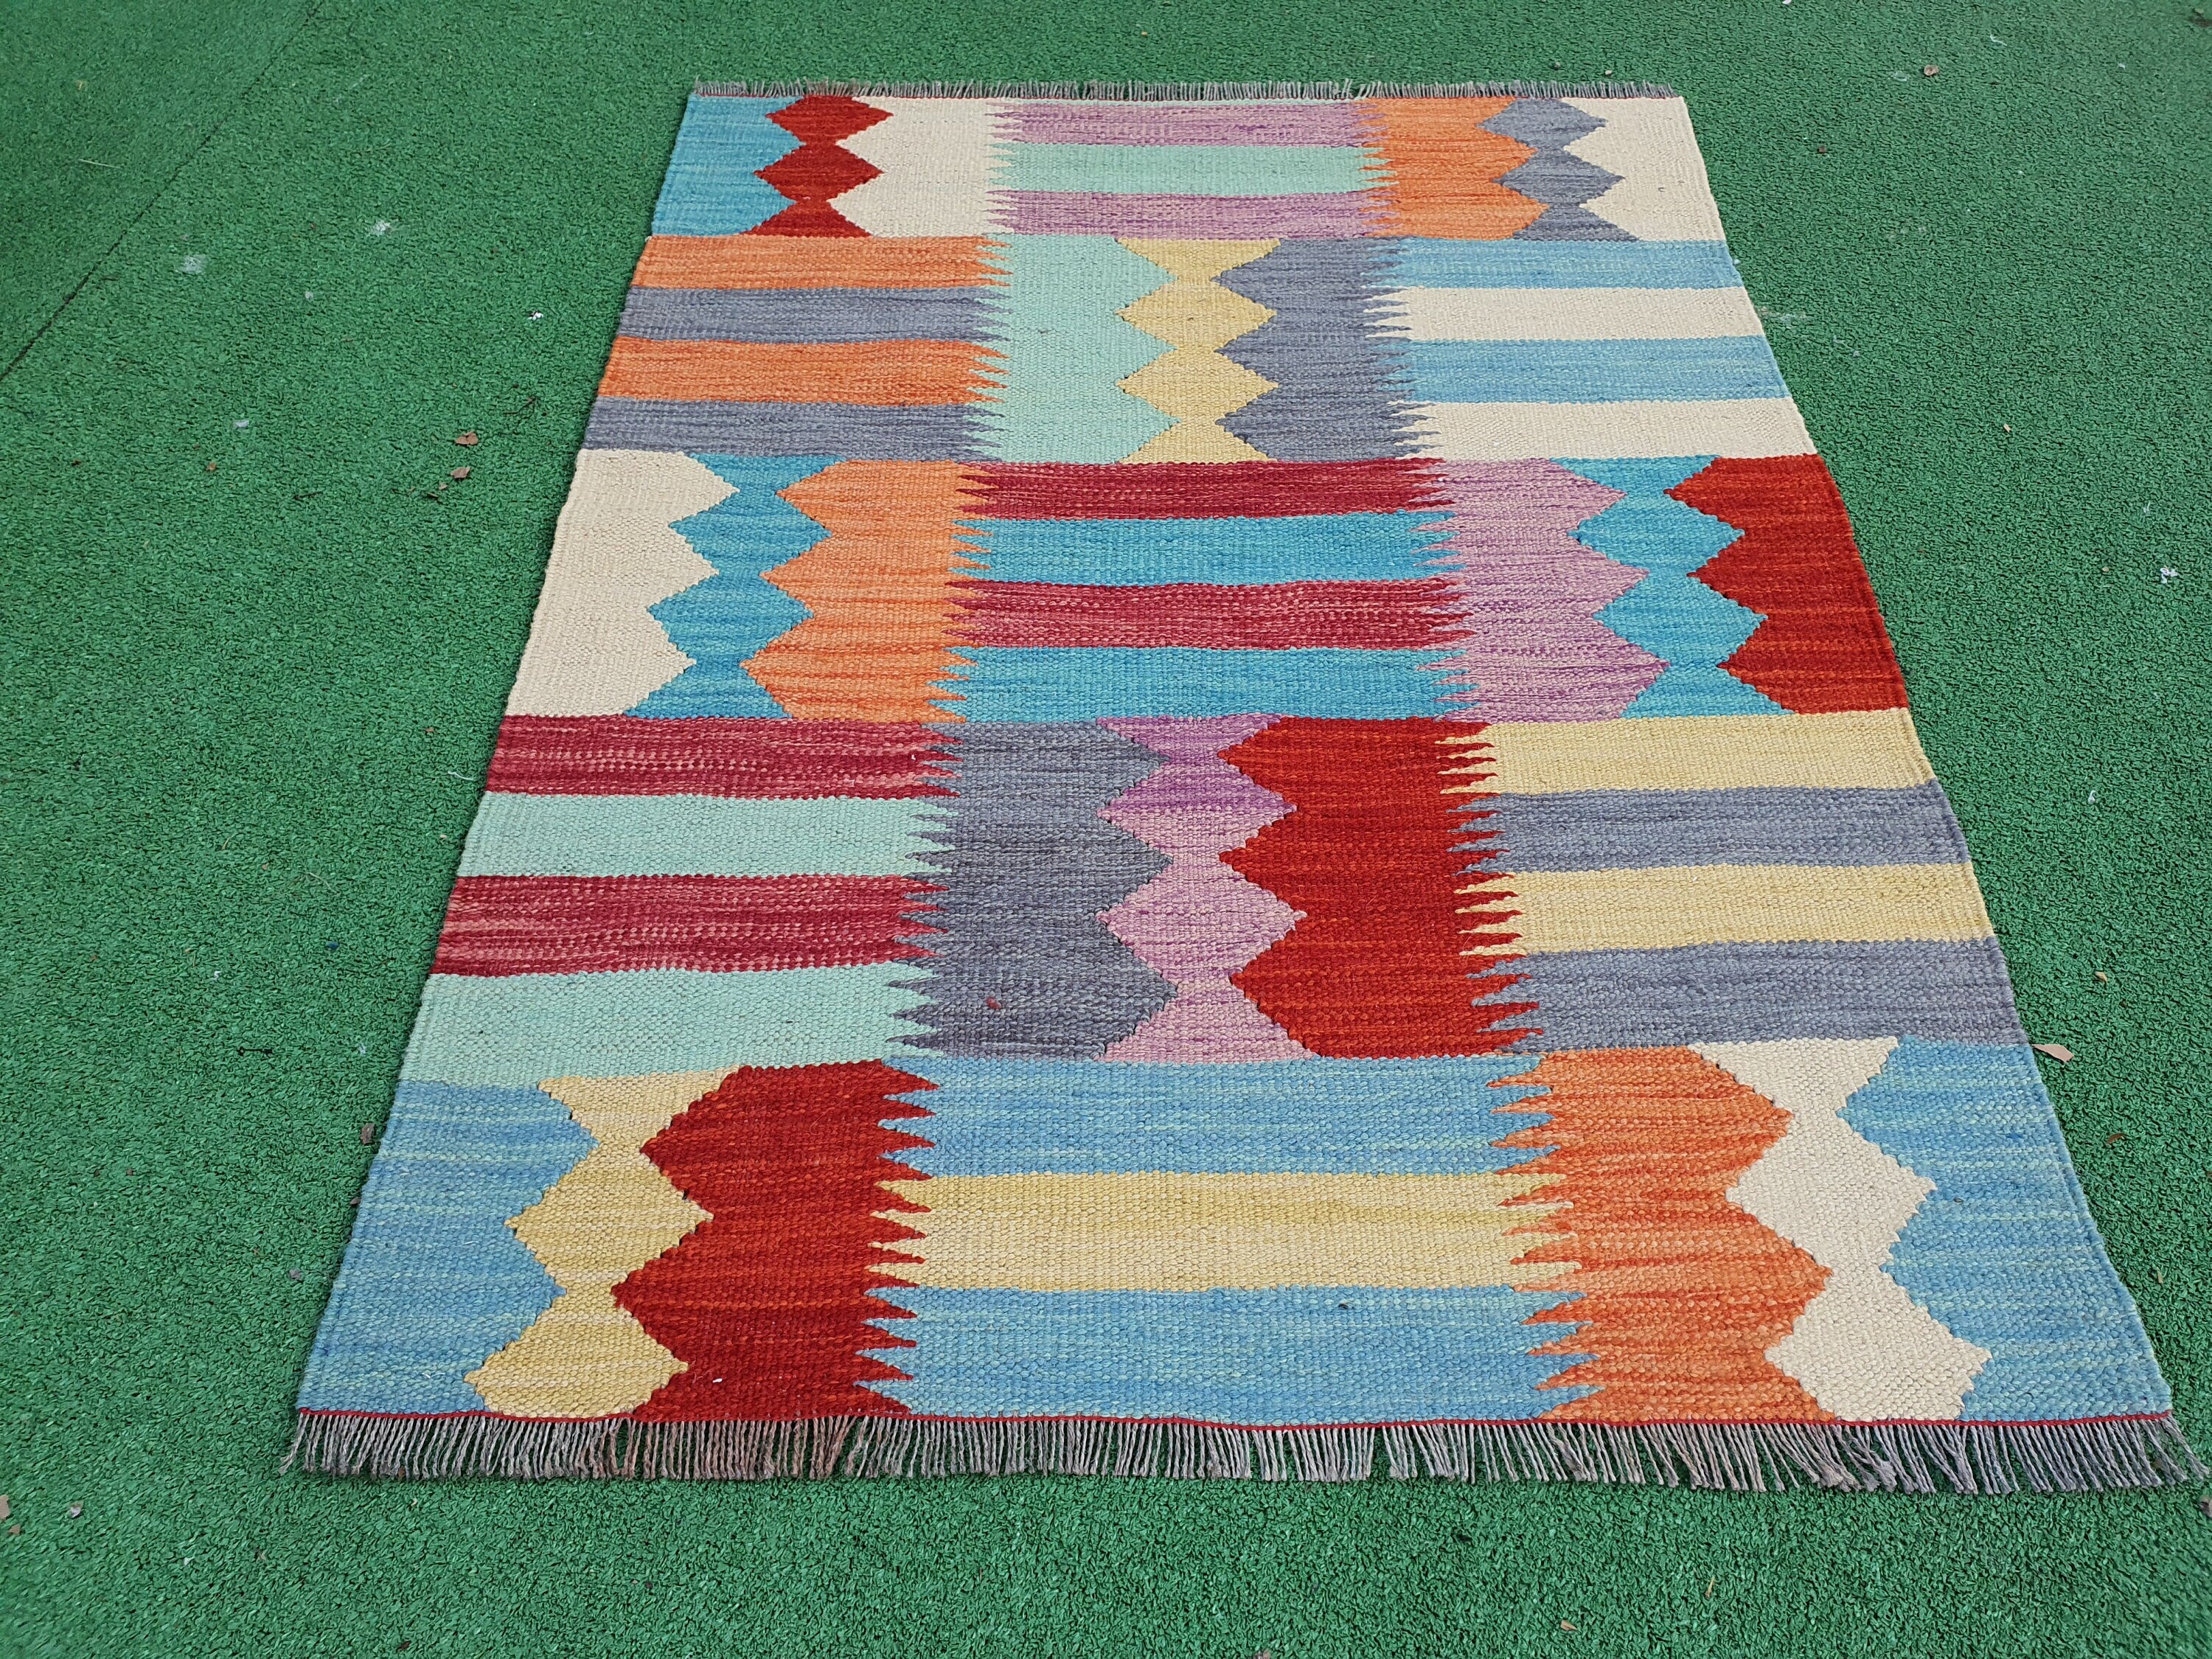 Oushak Kilim Rug, 3 ft 5 in x 2 ft 7 in Rust Red, Blue and Beige Turkish Entryway or Door Mat